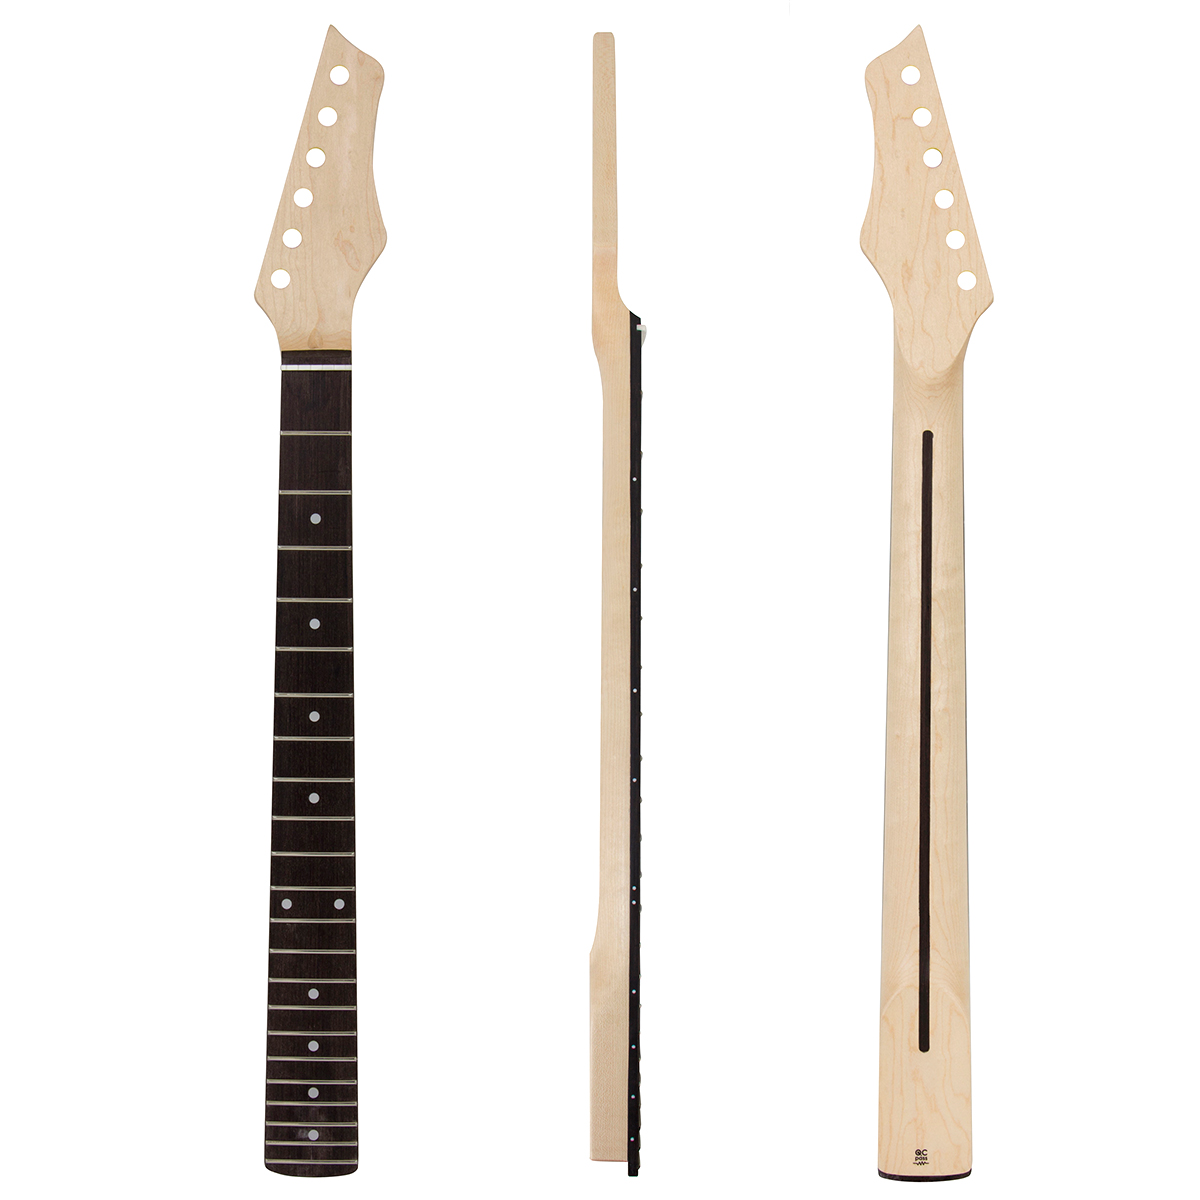 Kmise Electric Guitar Neck Canada Maple 22 Frets HPL Fingerboard Bolt on C Shape with Back Inlay Clear Satin